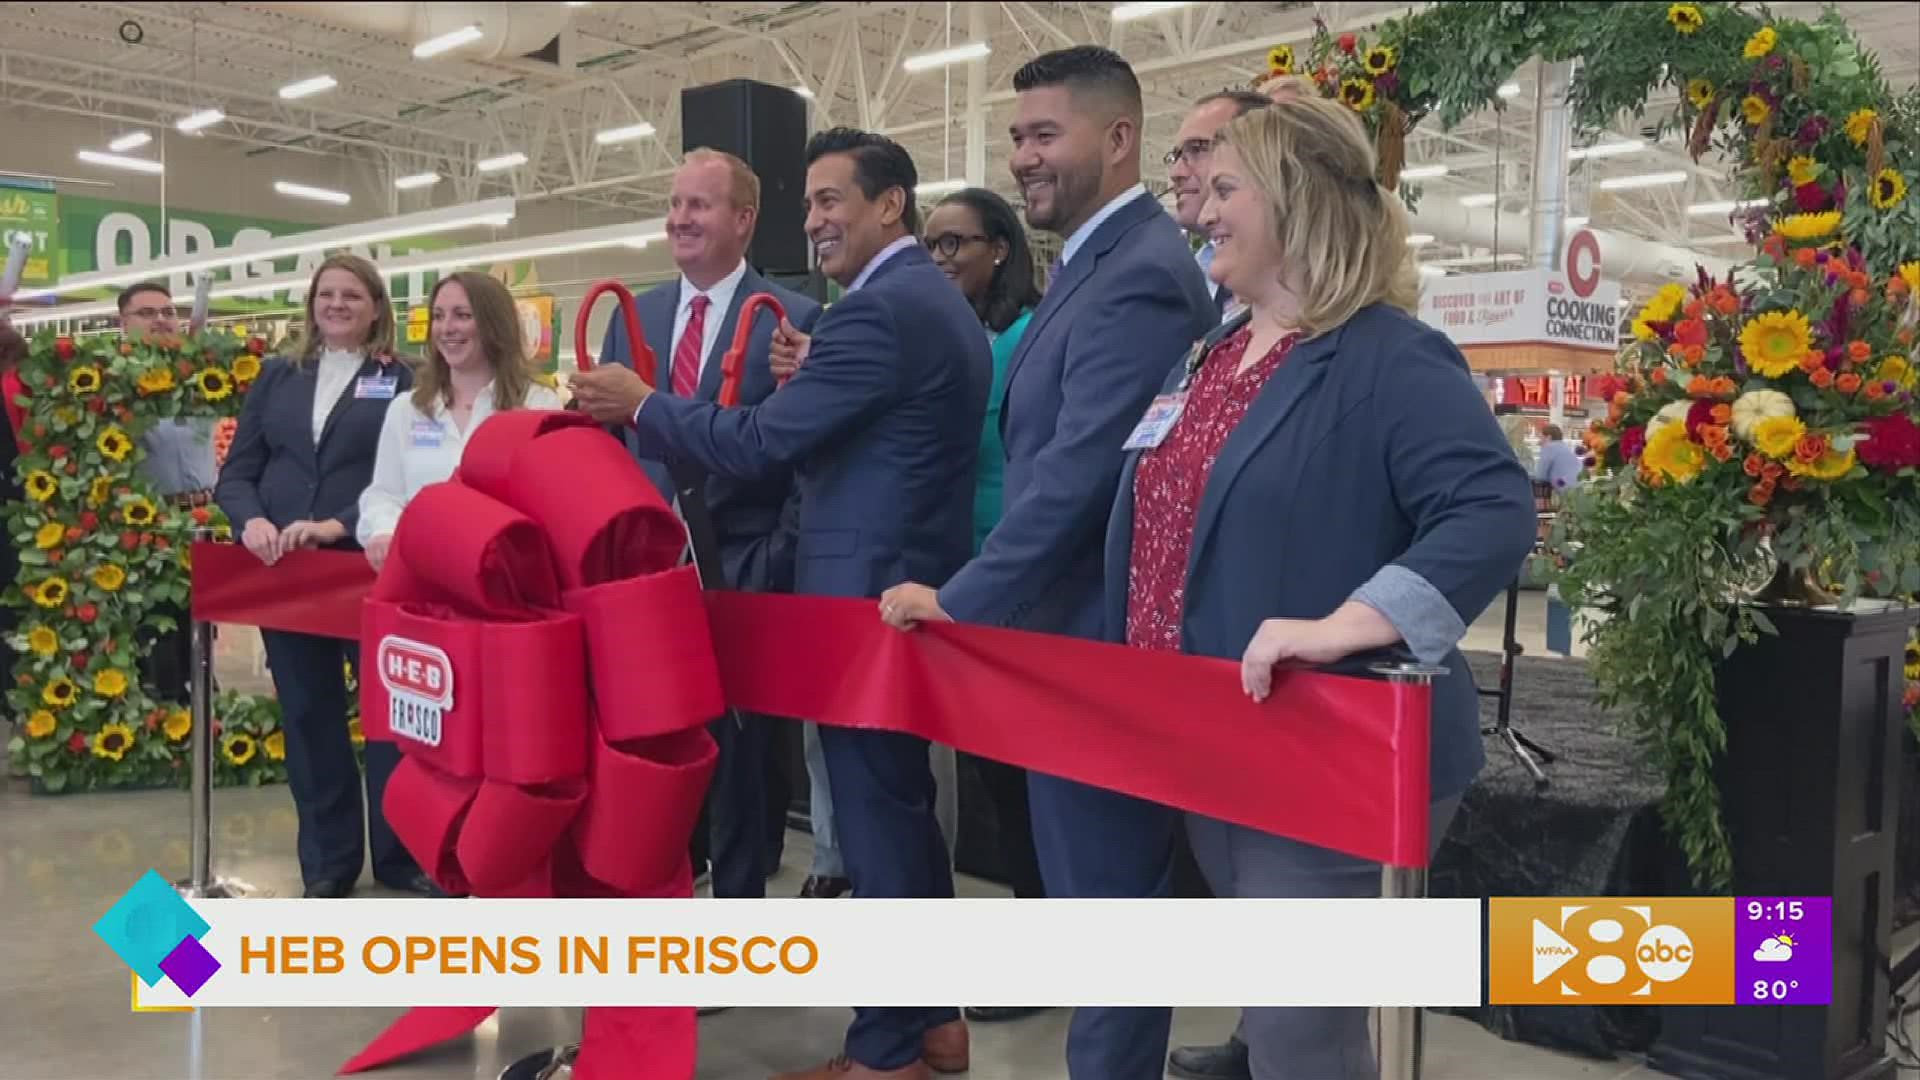 The wait is over – the newest HEB has opened in Frisco! Paige grabbed a cart and showed us inside the first DFW store.